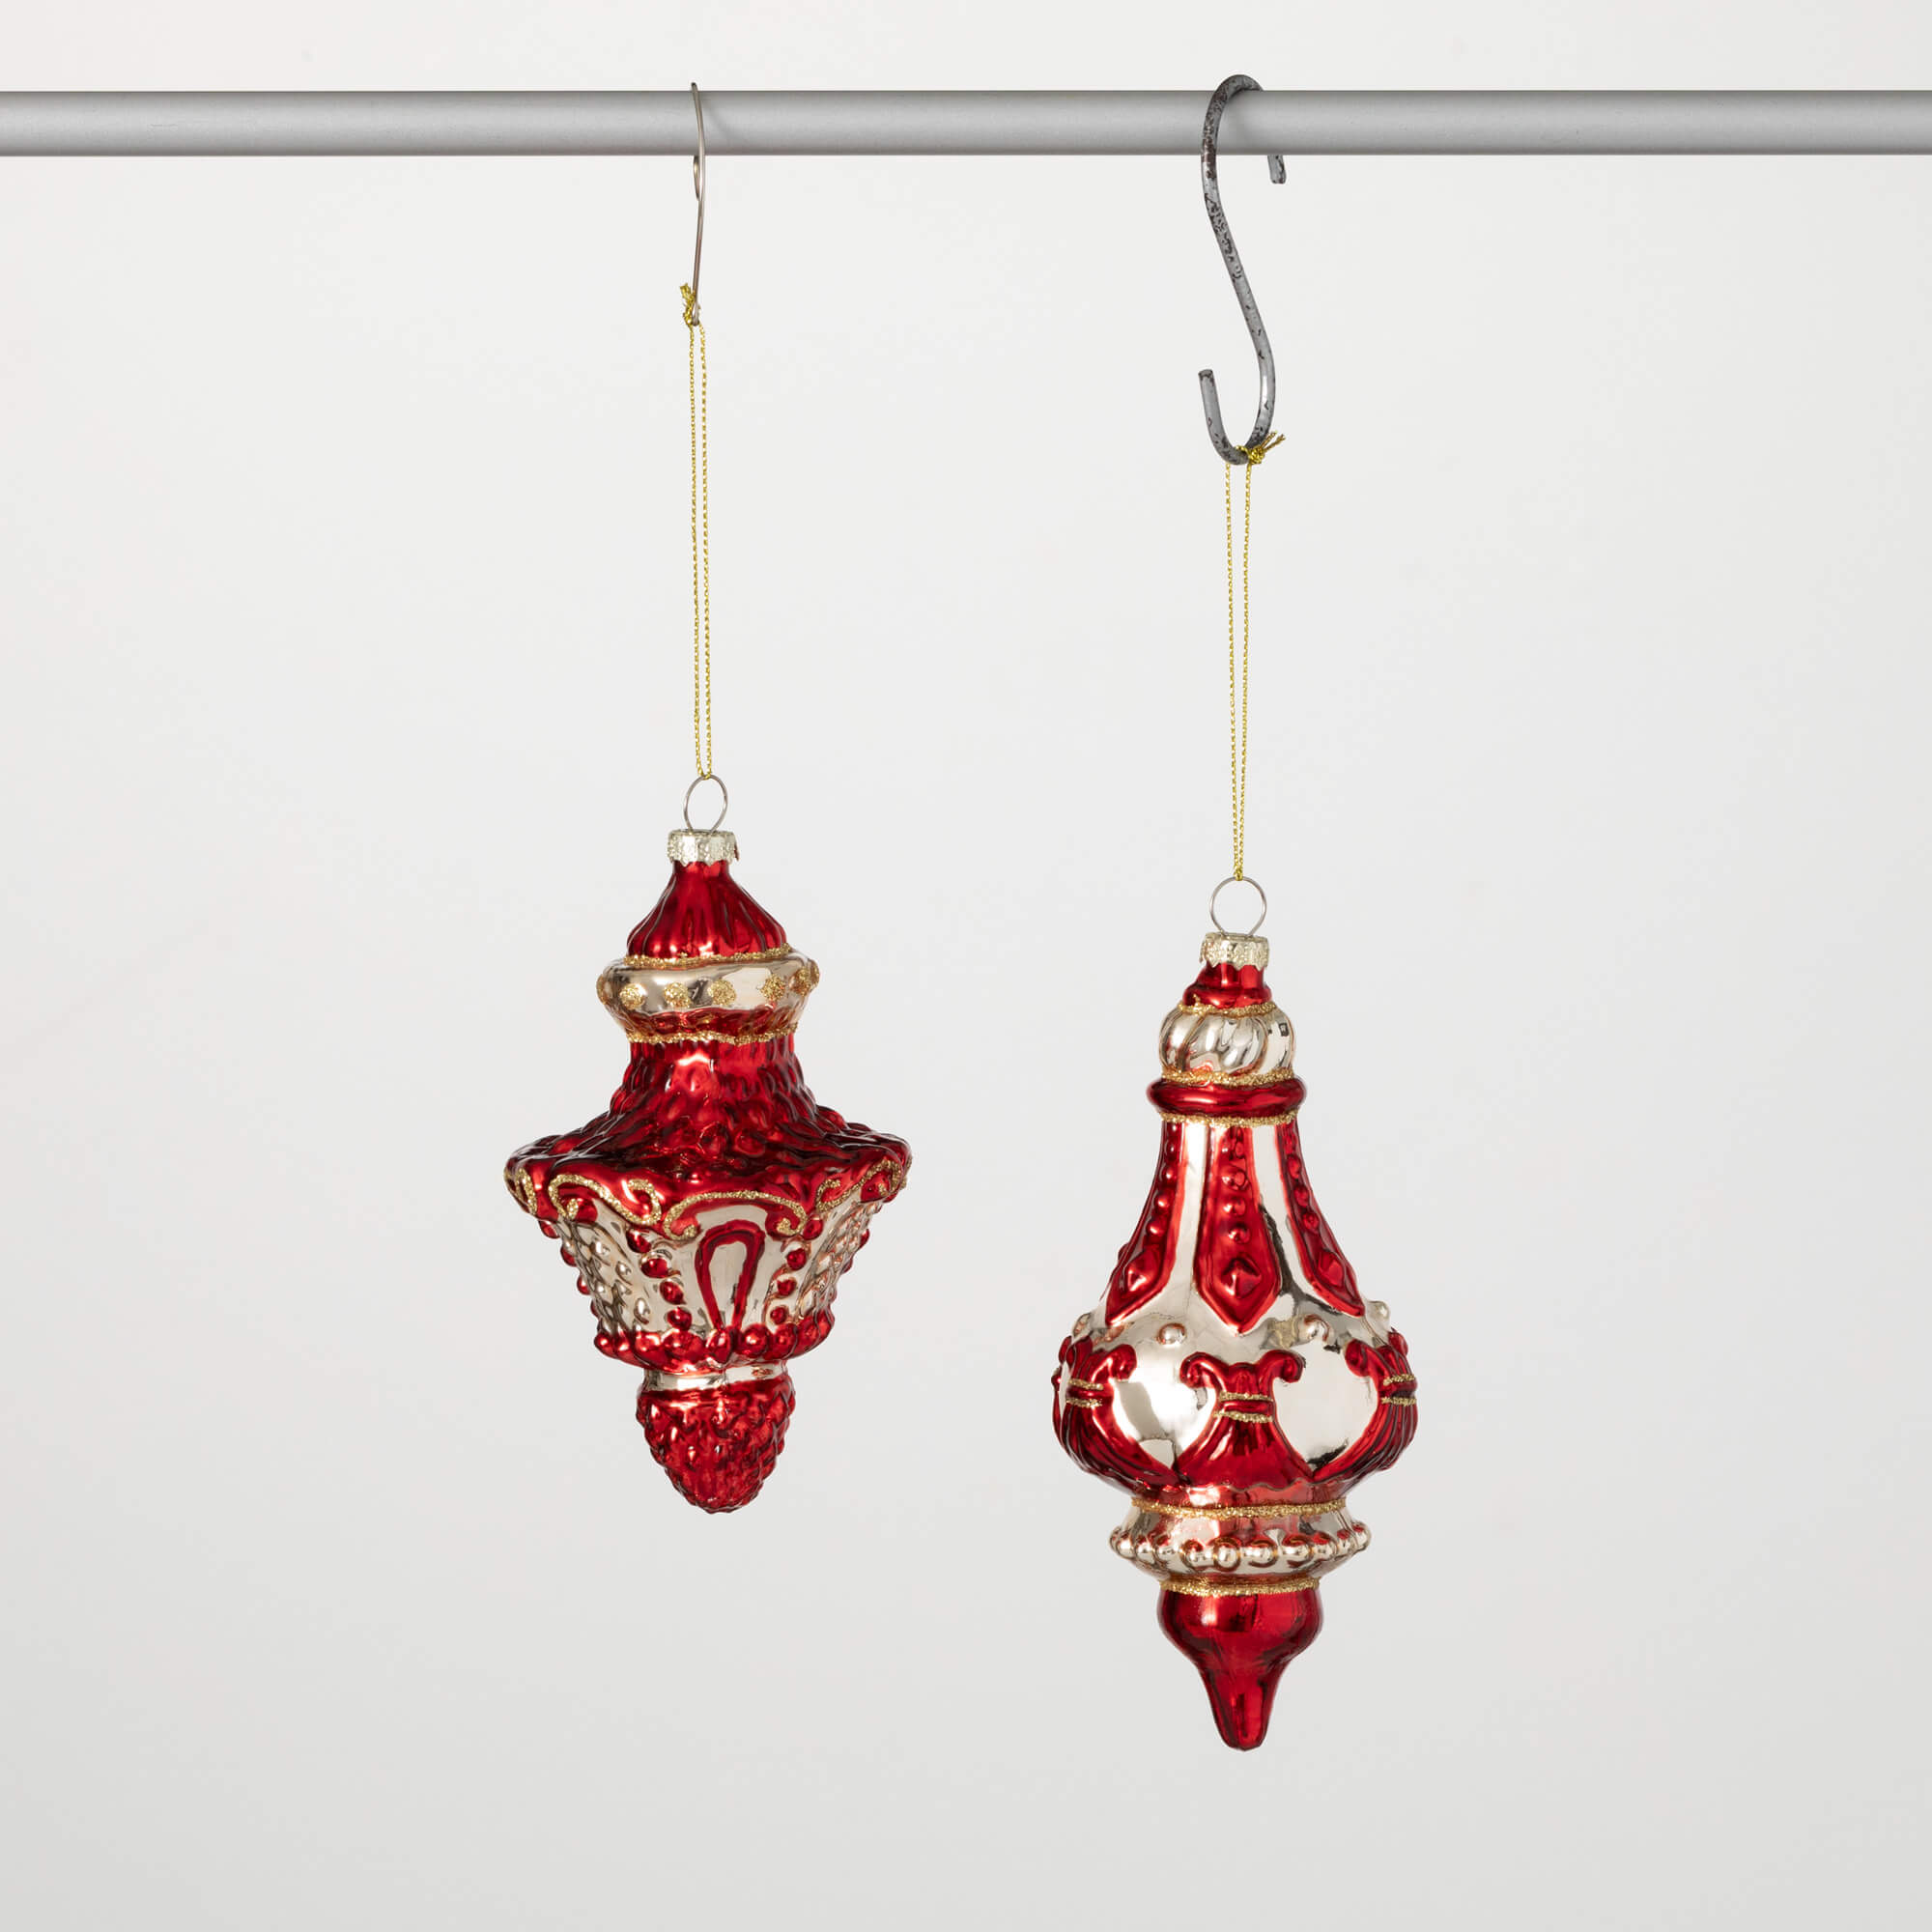 RED GOLD FINIAL ORNAMENT SET